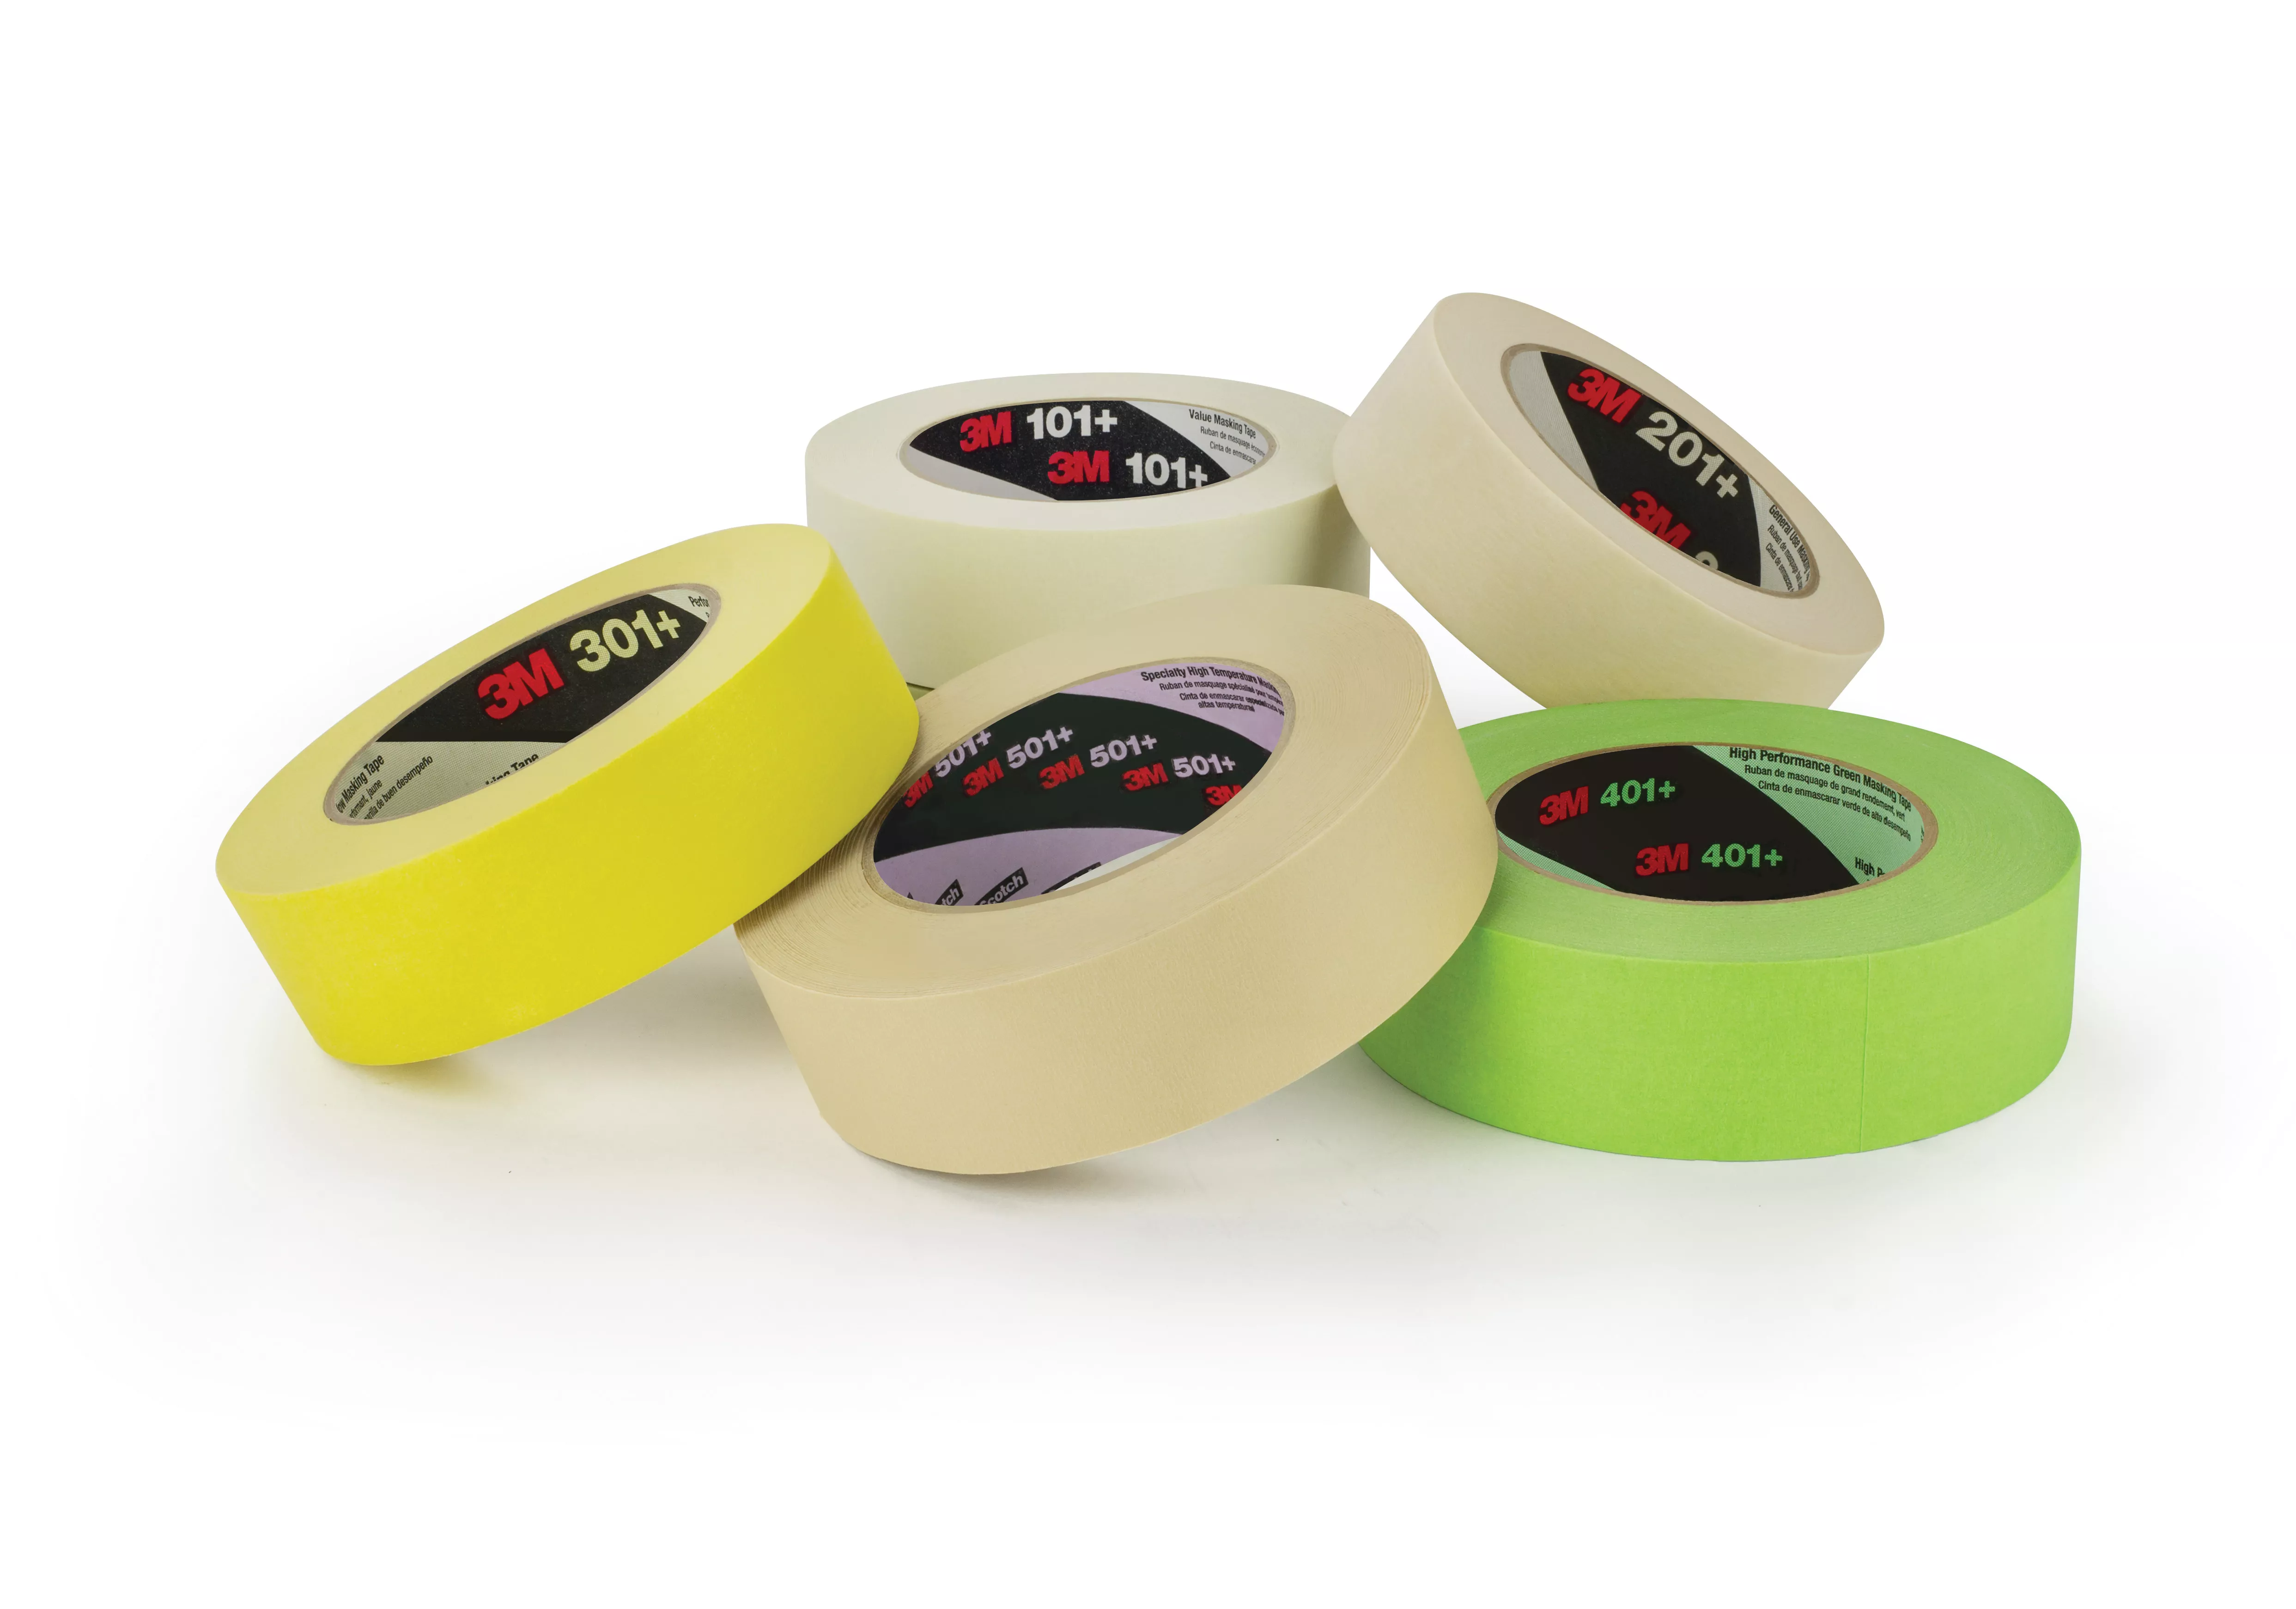 3M™ Specialty High Temperature Masking Tape 501+, 1490 mm x 55 m, 7.3
mil, 1 Roll/Case, Restricted